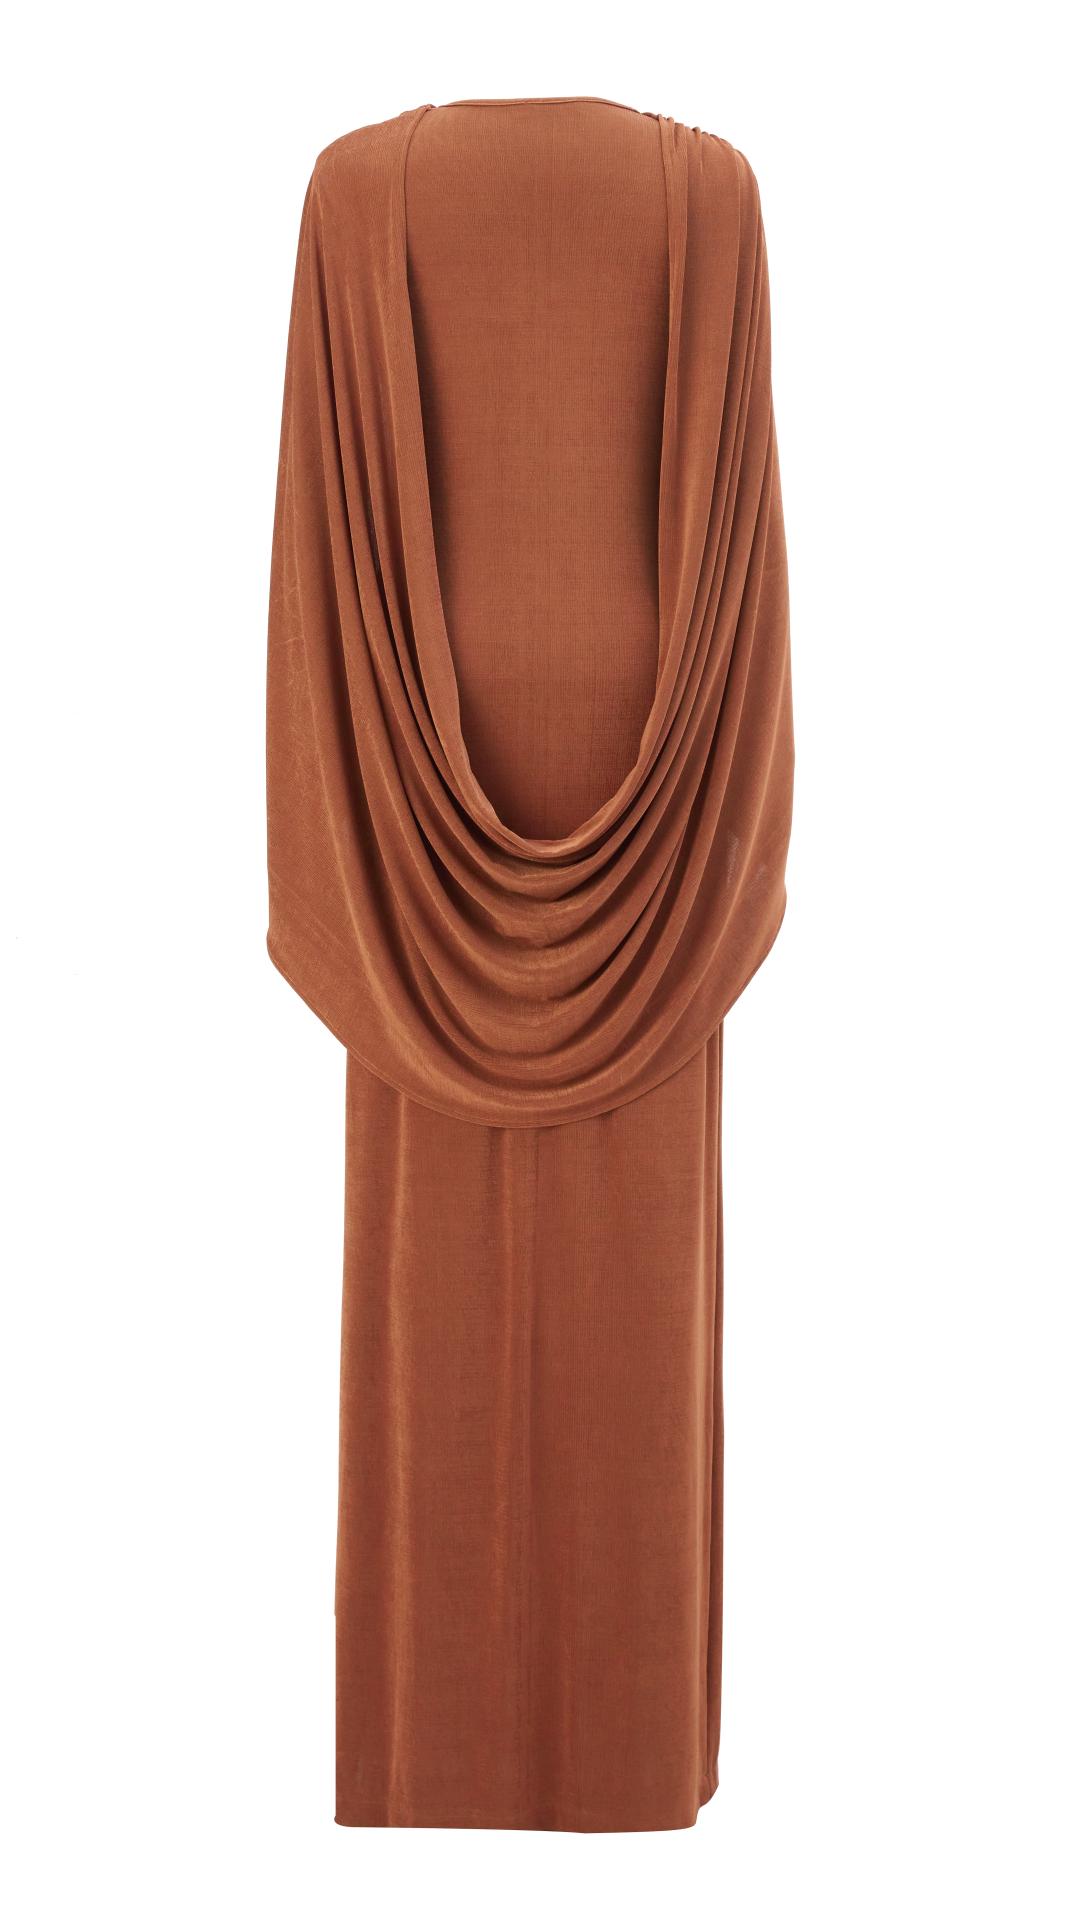 BROWN LONG KNITTED DRESS